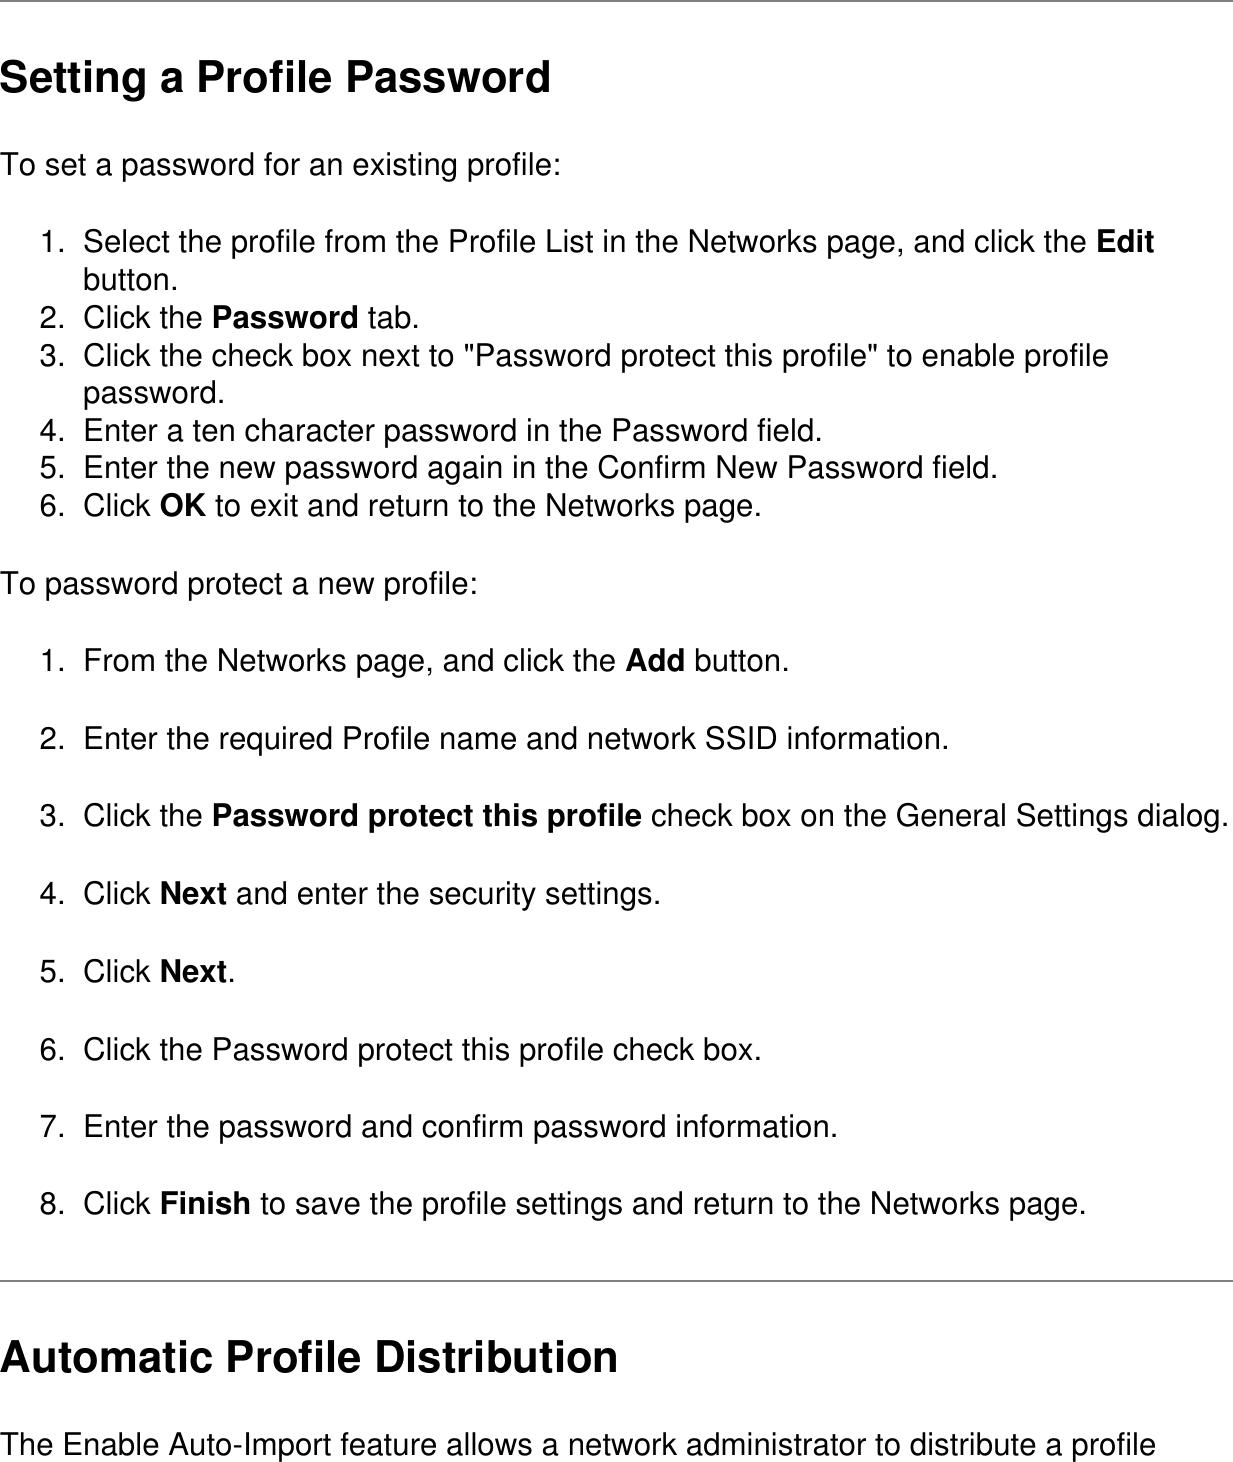 Setting a Profile PasswordTo set a password for an existing profile:1.  Select the profile from the Profile List in the Networks page, and click the Edit button.2.  Click the Password tab.3.  Click the check box next to &quot;Password protect this profile&quot; to enable profile password.4.  Enter a ten character password in the Password field.5.  Enter the new password again in the Confirm New Password field.6.  Click OK to exit and return to the Networks page.To password protect a new profile:1.  From the Networks page, and click the Add button.2.  Enter the required Profile name and network SSID information.3.  Click the Password protect this profile check box on the General Settings dialog.4.  Click Next and enter the security settings.5.  Click Next.6.  Click the Password protect this profile check box.7.  Enter the password and confirm password information.8.  Click Finish to save the profile settings and return to the Networks page.Automatic Profile DistributionThe Enable Auto-Import feature allows a network administrator to distribute a profile 